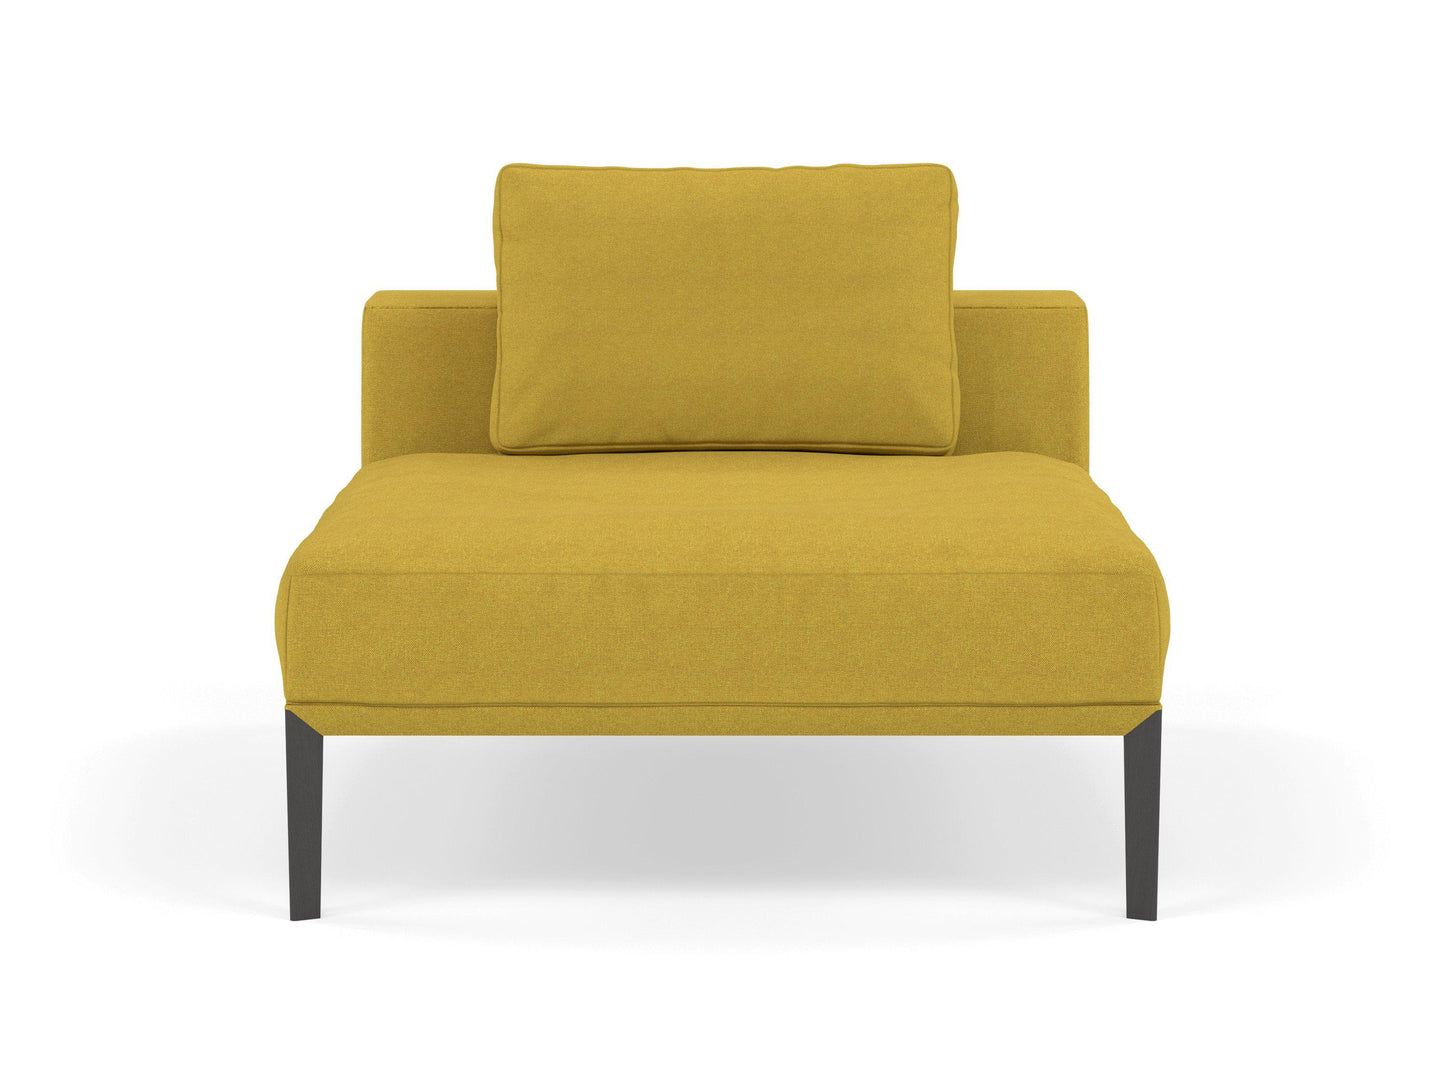 Modern Armchair 1 Seater Sofa without armrests in Vibrant Mustard Yellow Fabric-Wenge Oak-Distinct Designs (London) Ltd